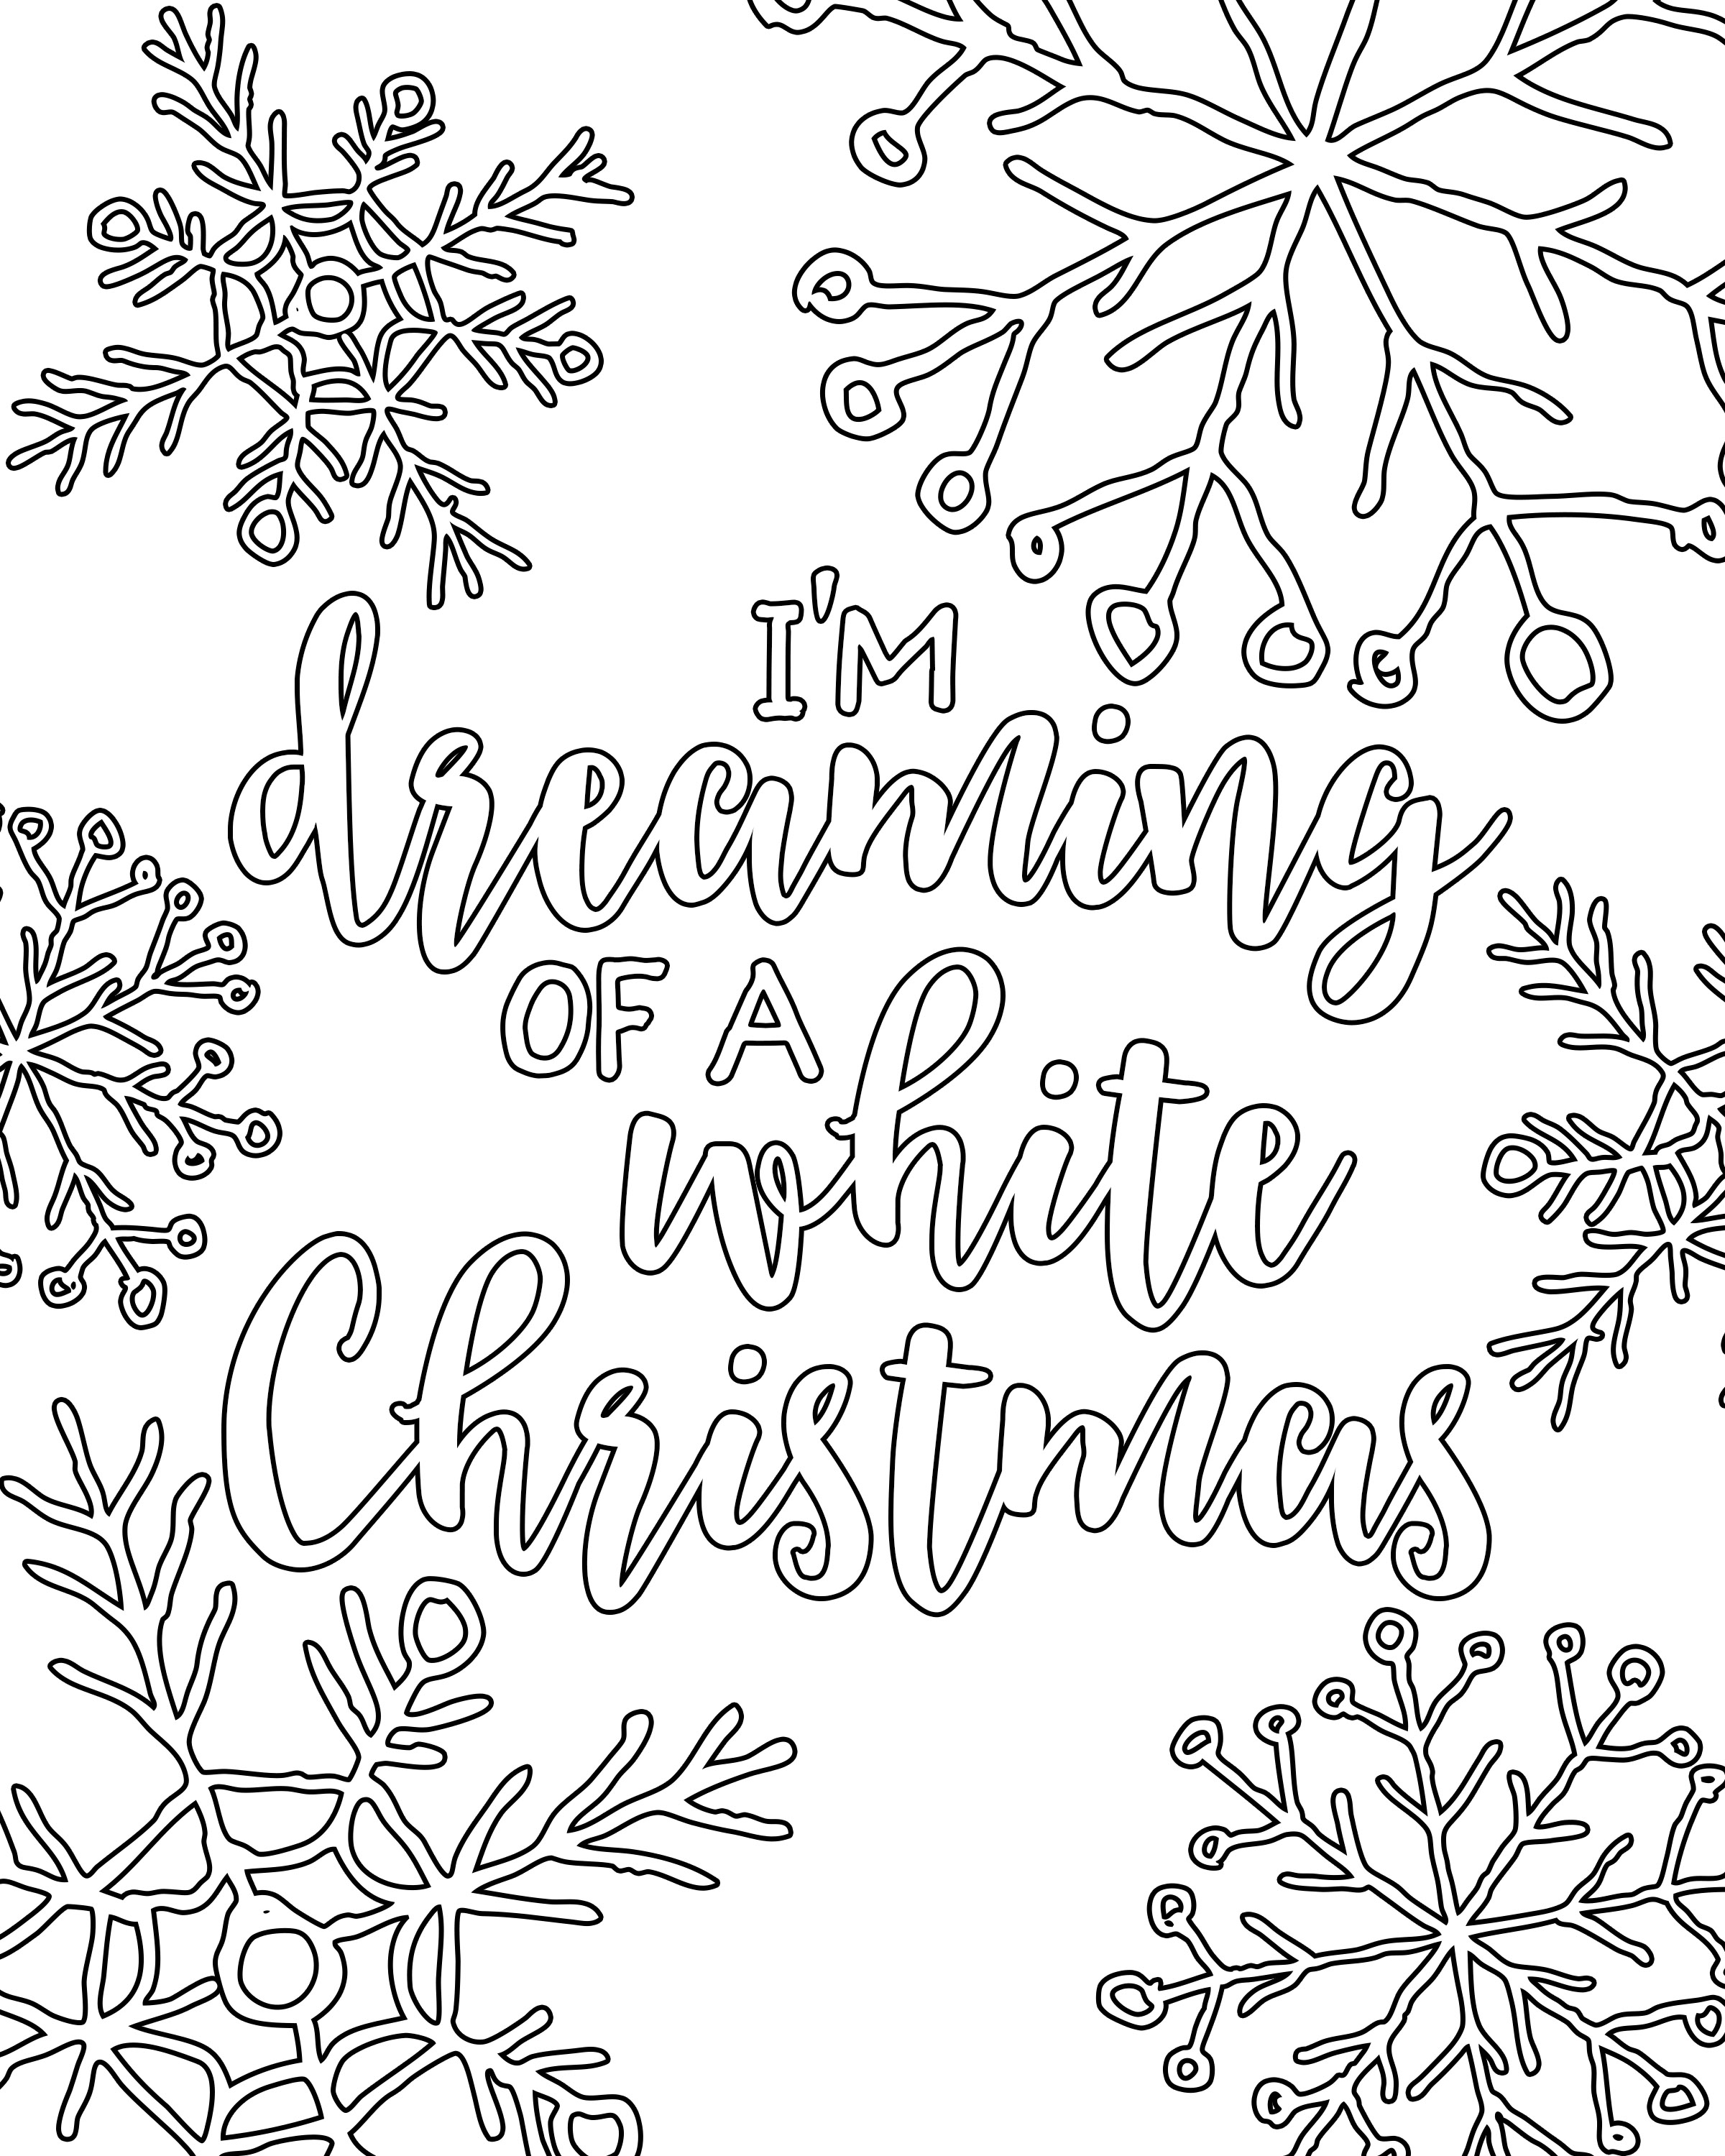 Download Christmas Coloring Pages For Adults Printable Free Images 